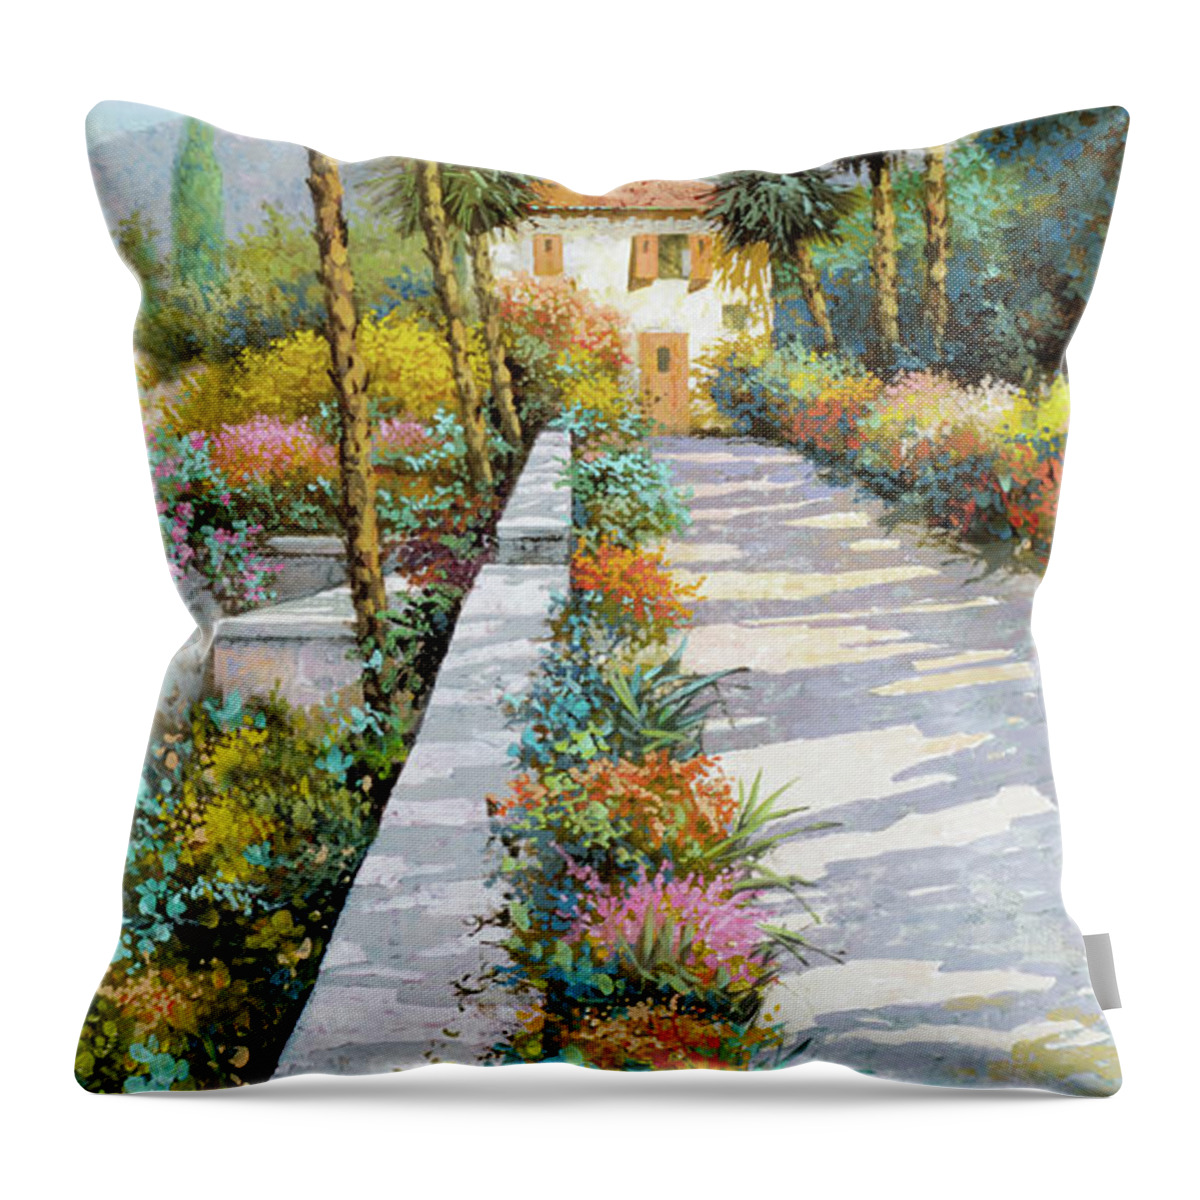 Lakescape Throw Pillow featuring the painting La casa in fondo by Guido Borelli